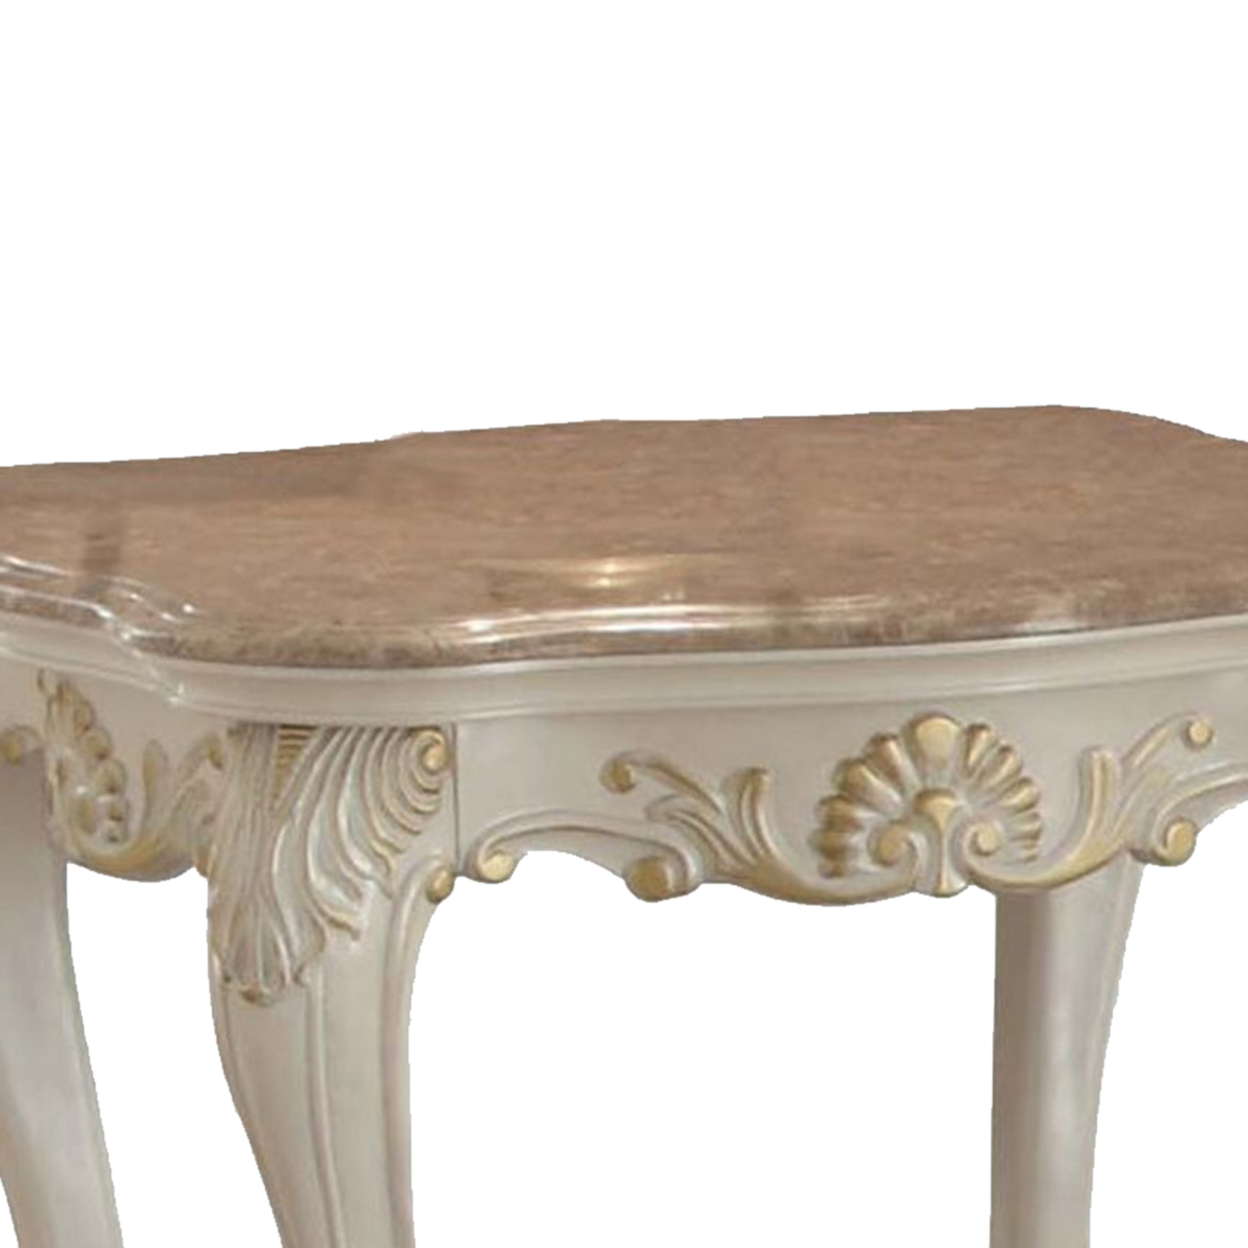 Wooden End Table With Marble Top, Pearl White- Saltoro Sherpi